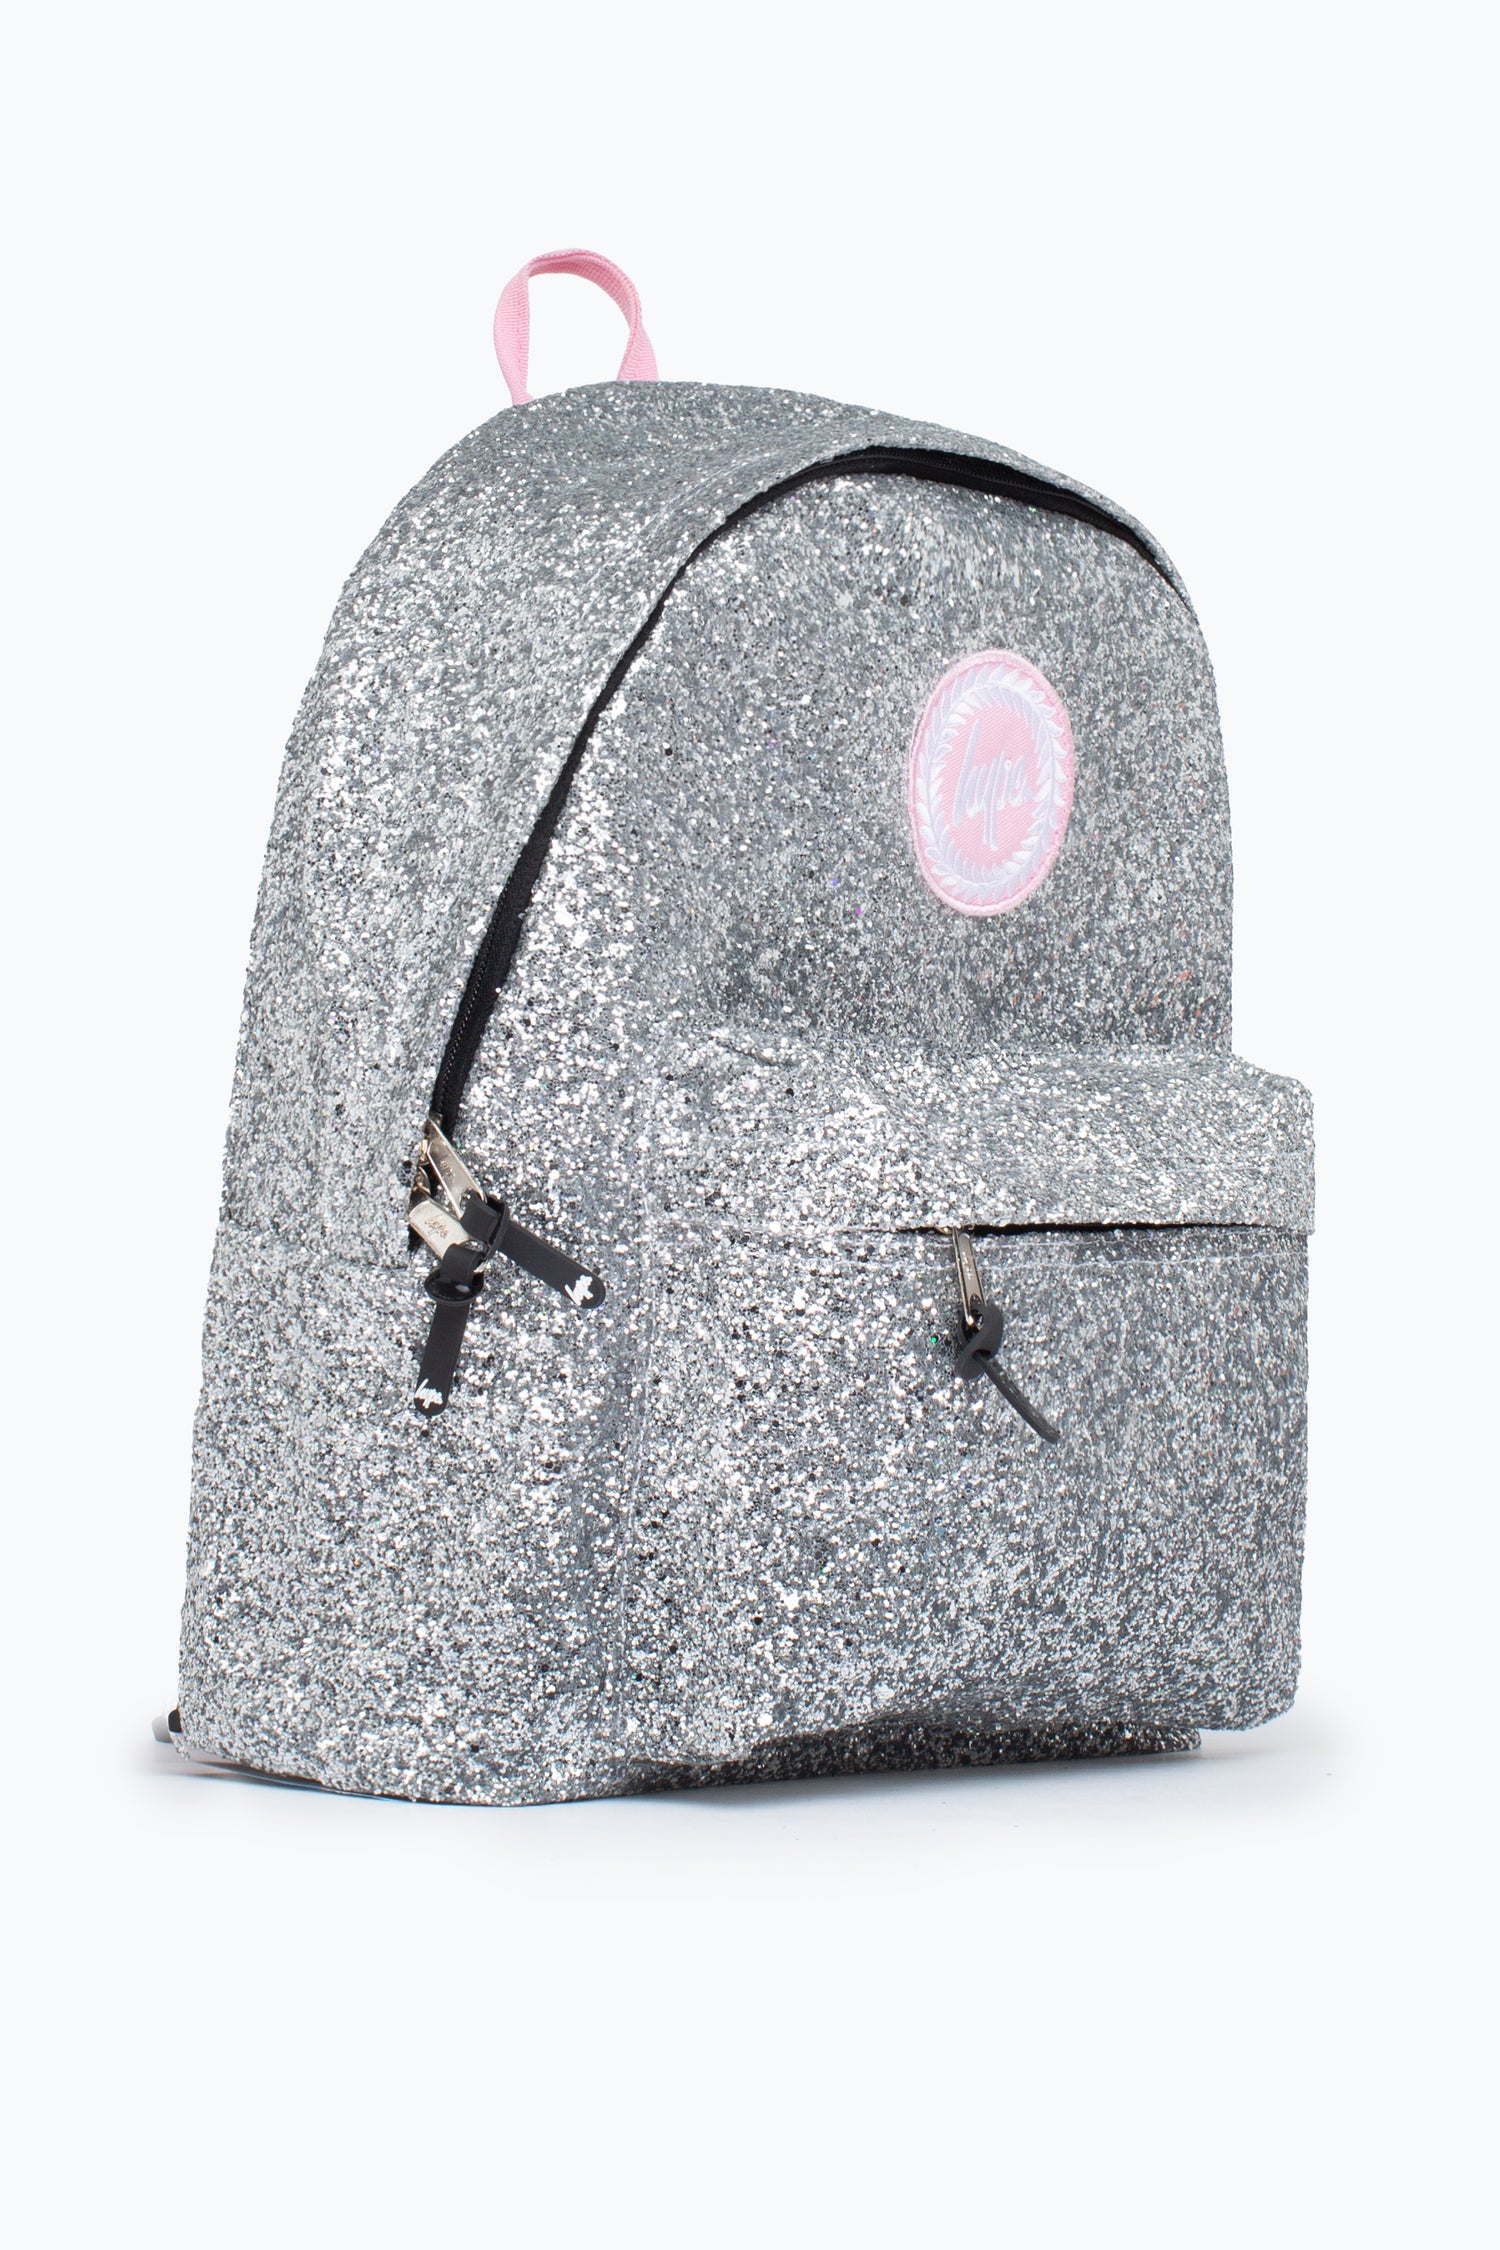 HYPE UNISEX SILVER GLITTER PINK CREST BACKPACK